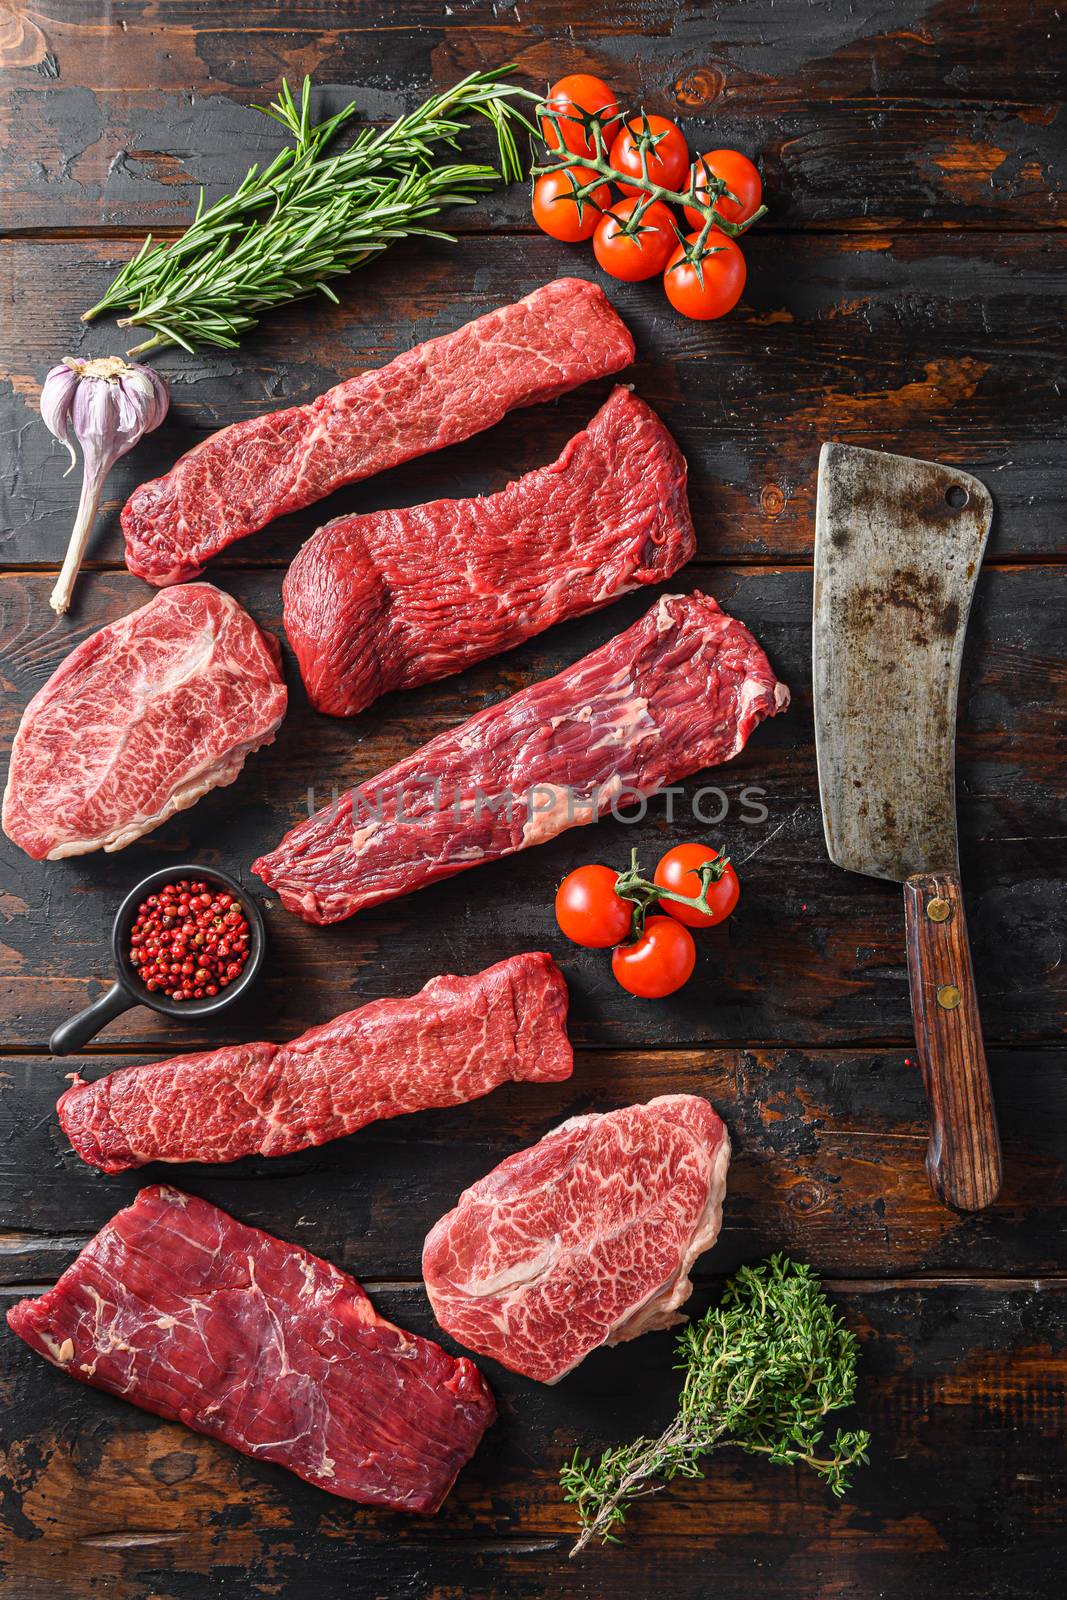 Set of flap flank Steak, machete steak or skirt cut, Top blade or flat iron beef and tri tip, triangle roast with denver cut with butcher cleaver top view over old butcher wood table by Ilianesolenyi